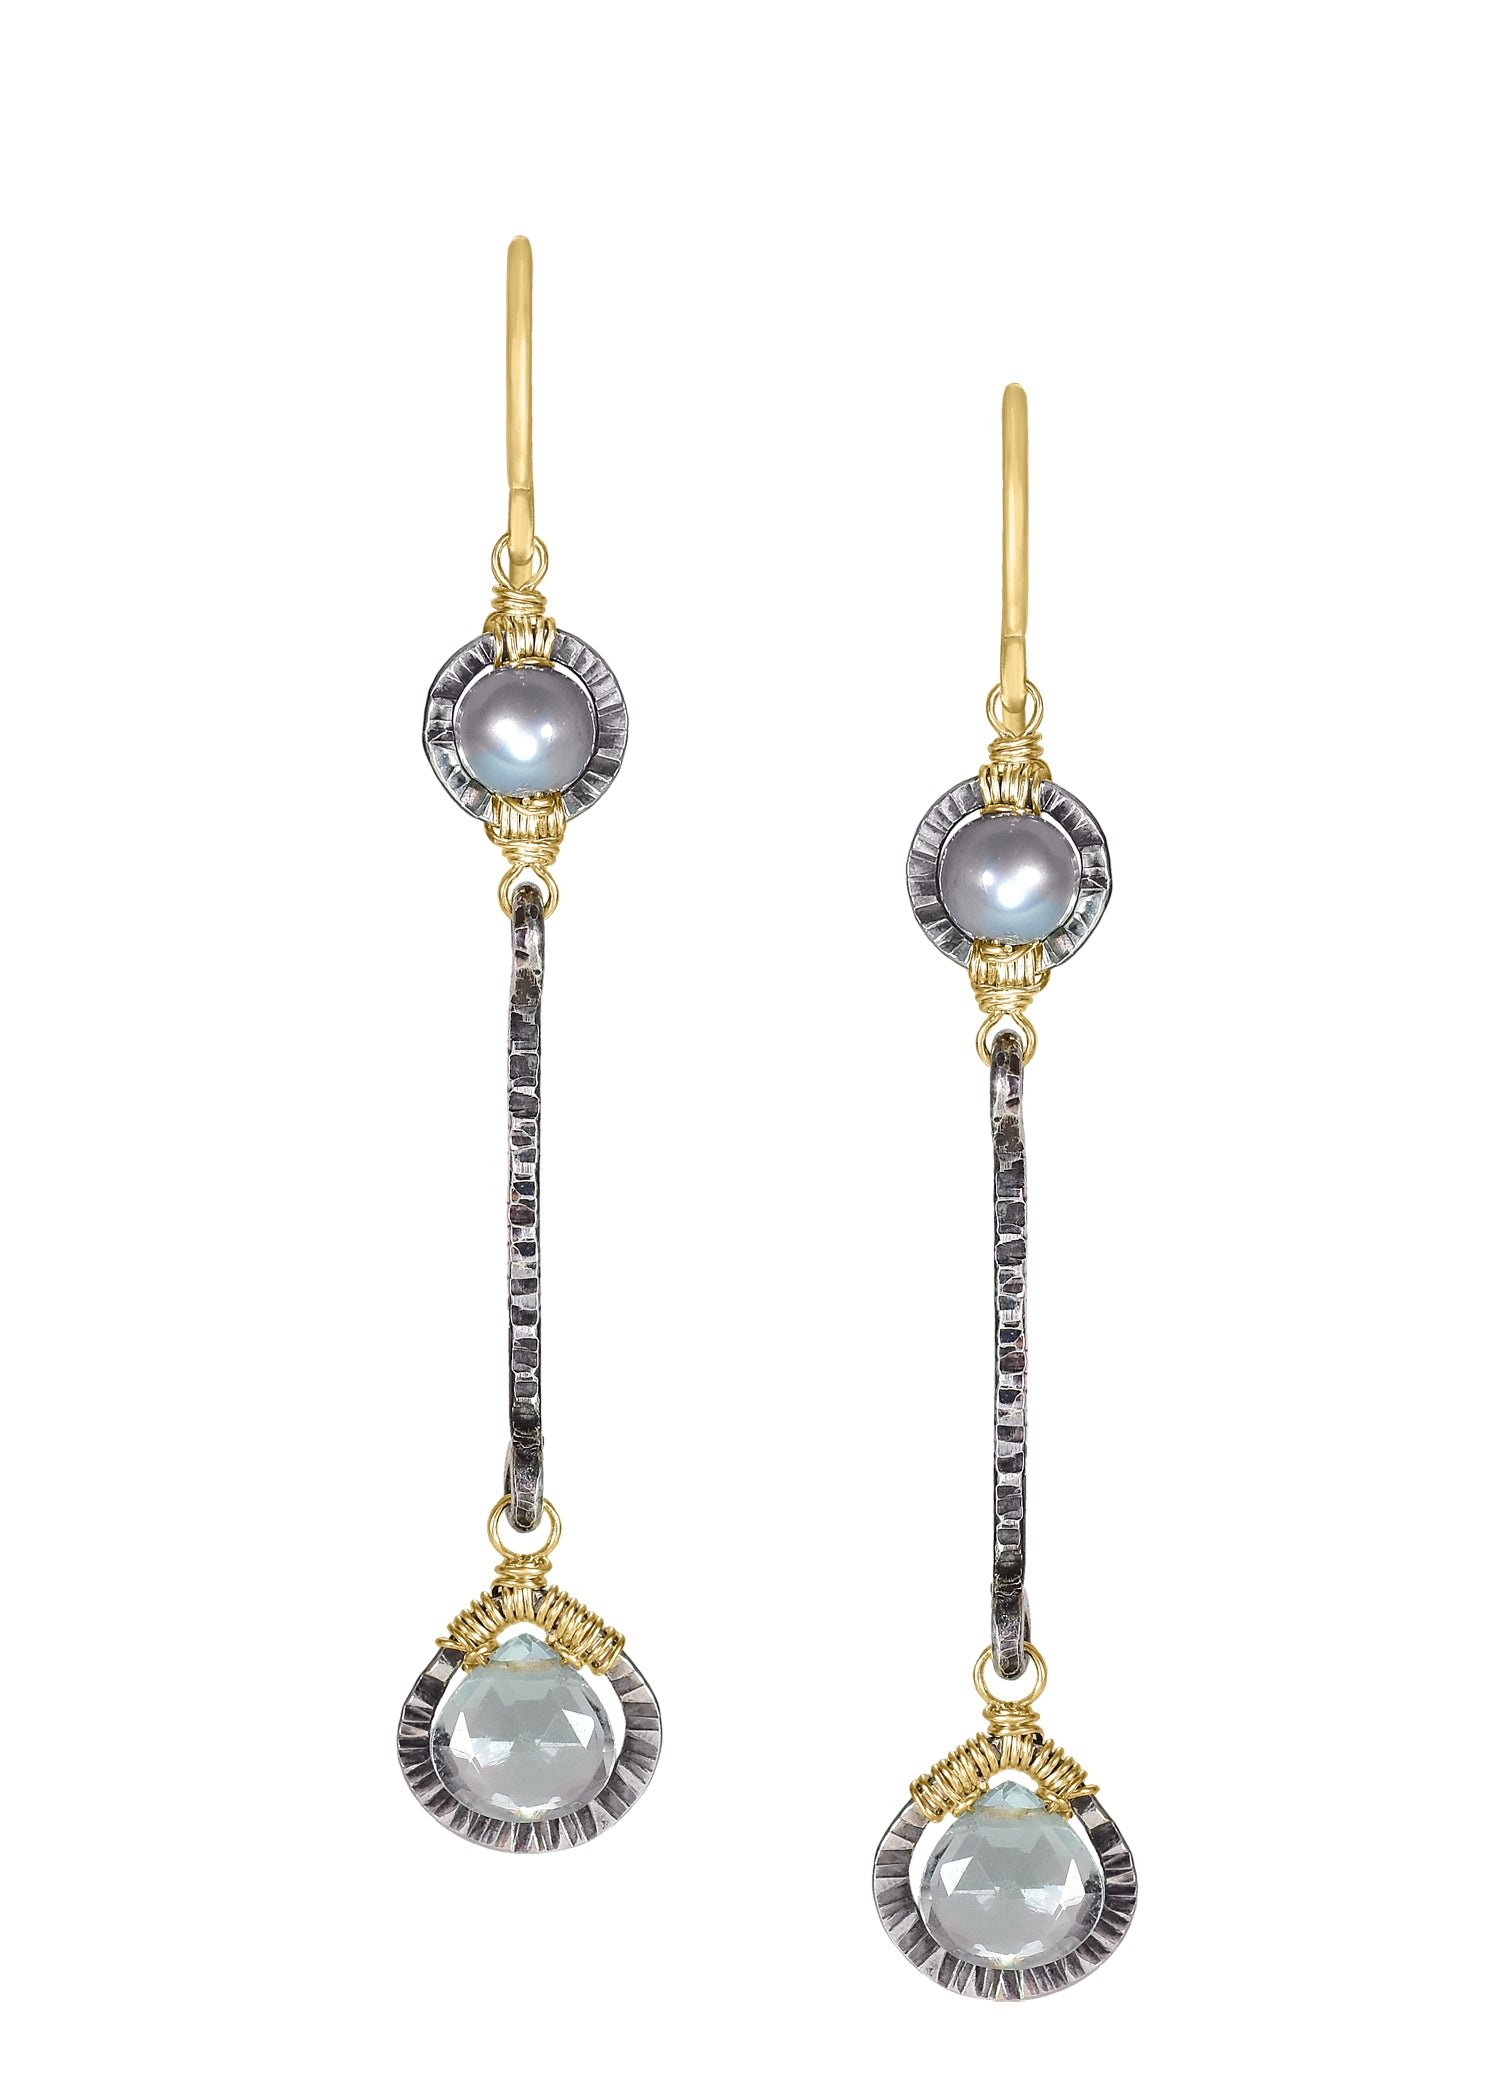 Labradorite Freshwater pearls Sterling silver 14k gold fill Mixed metal Earrings measure 2" in length (including the ear wires) and 1/4" in width at the widest point (bottom drop) Handmade in our Los Angeles studio